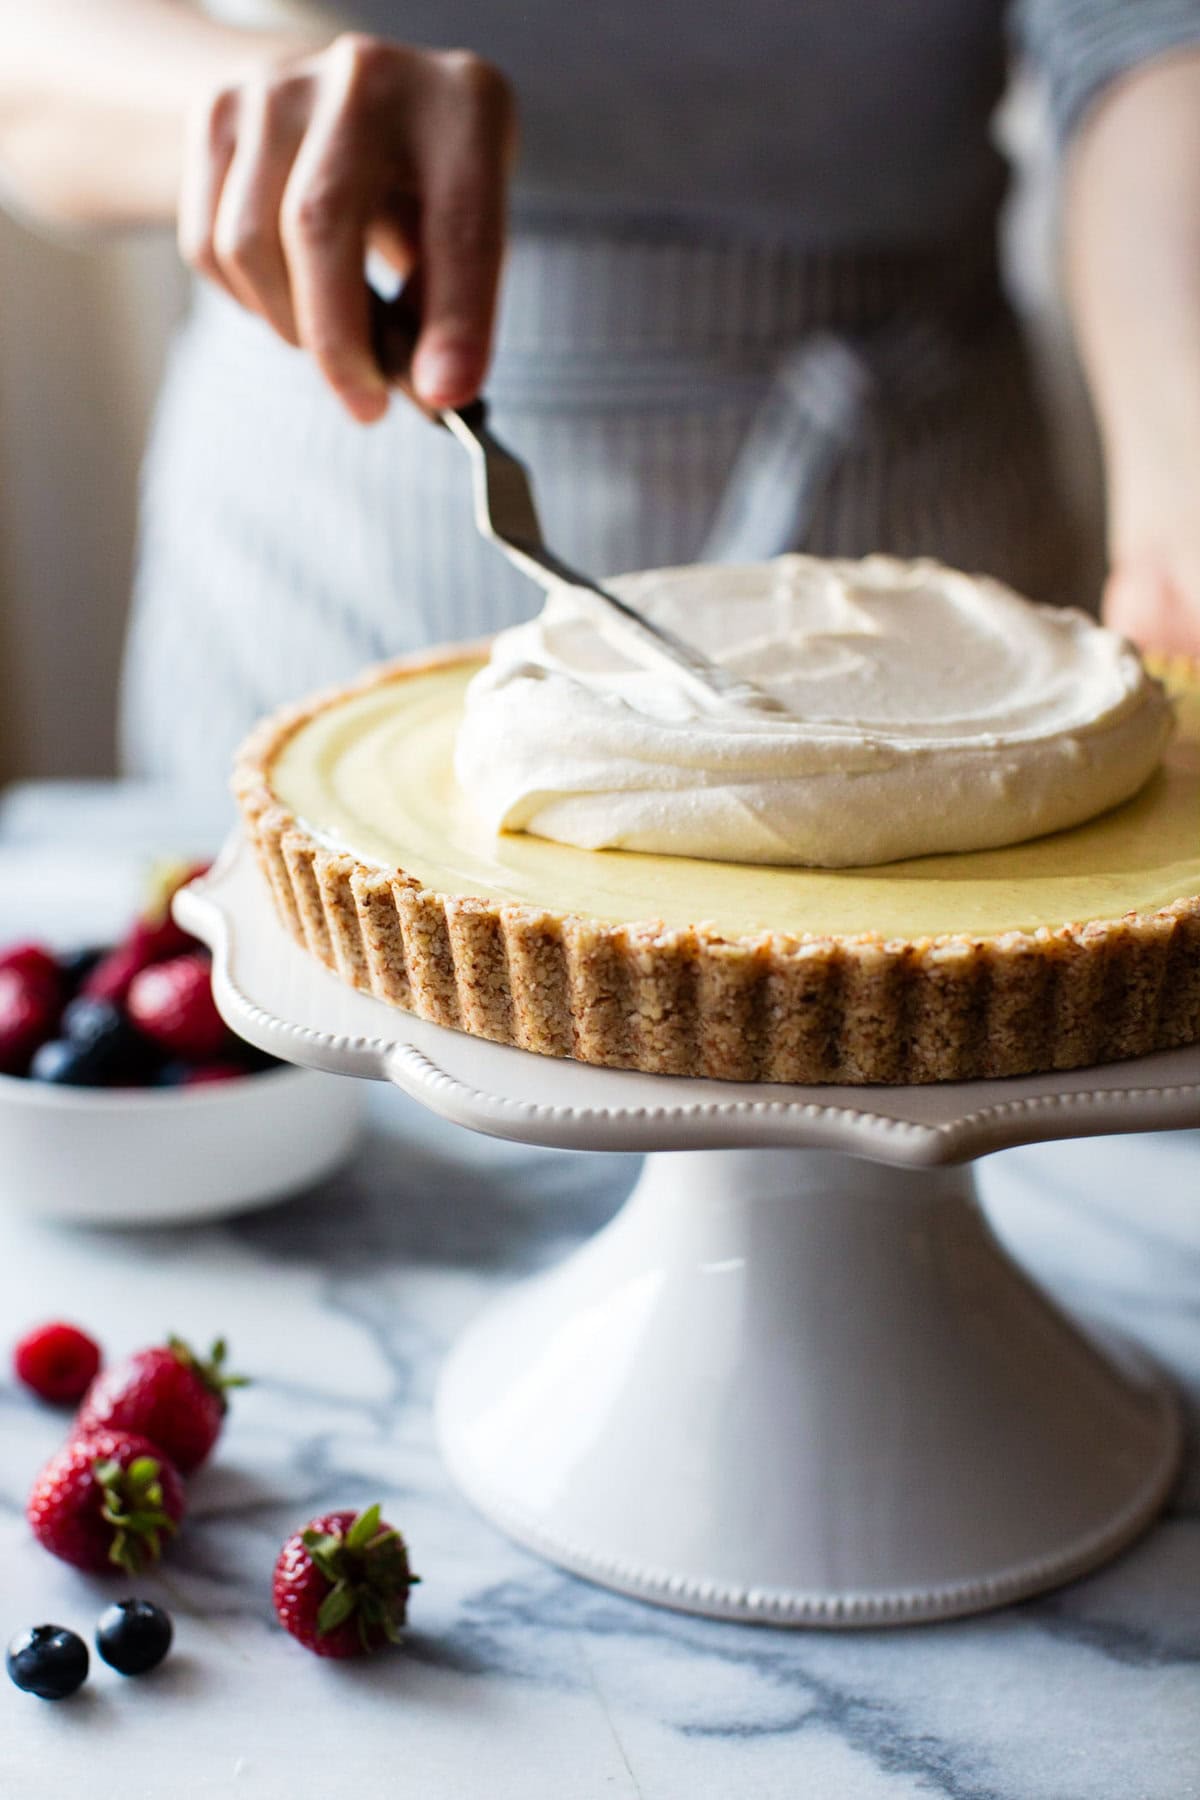 a lemon tart is on a cake stand having coconut whipped topping swirled over it